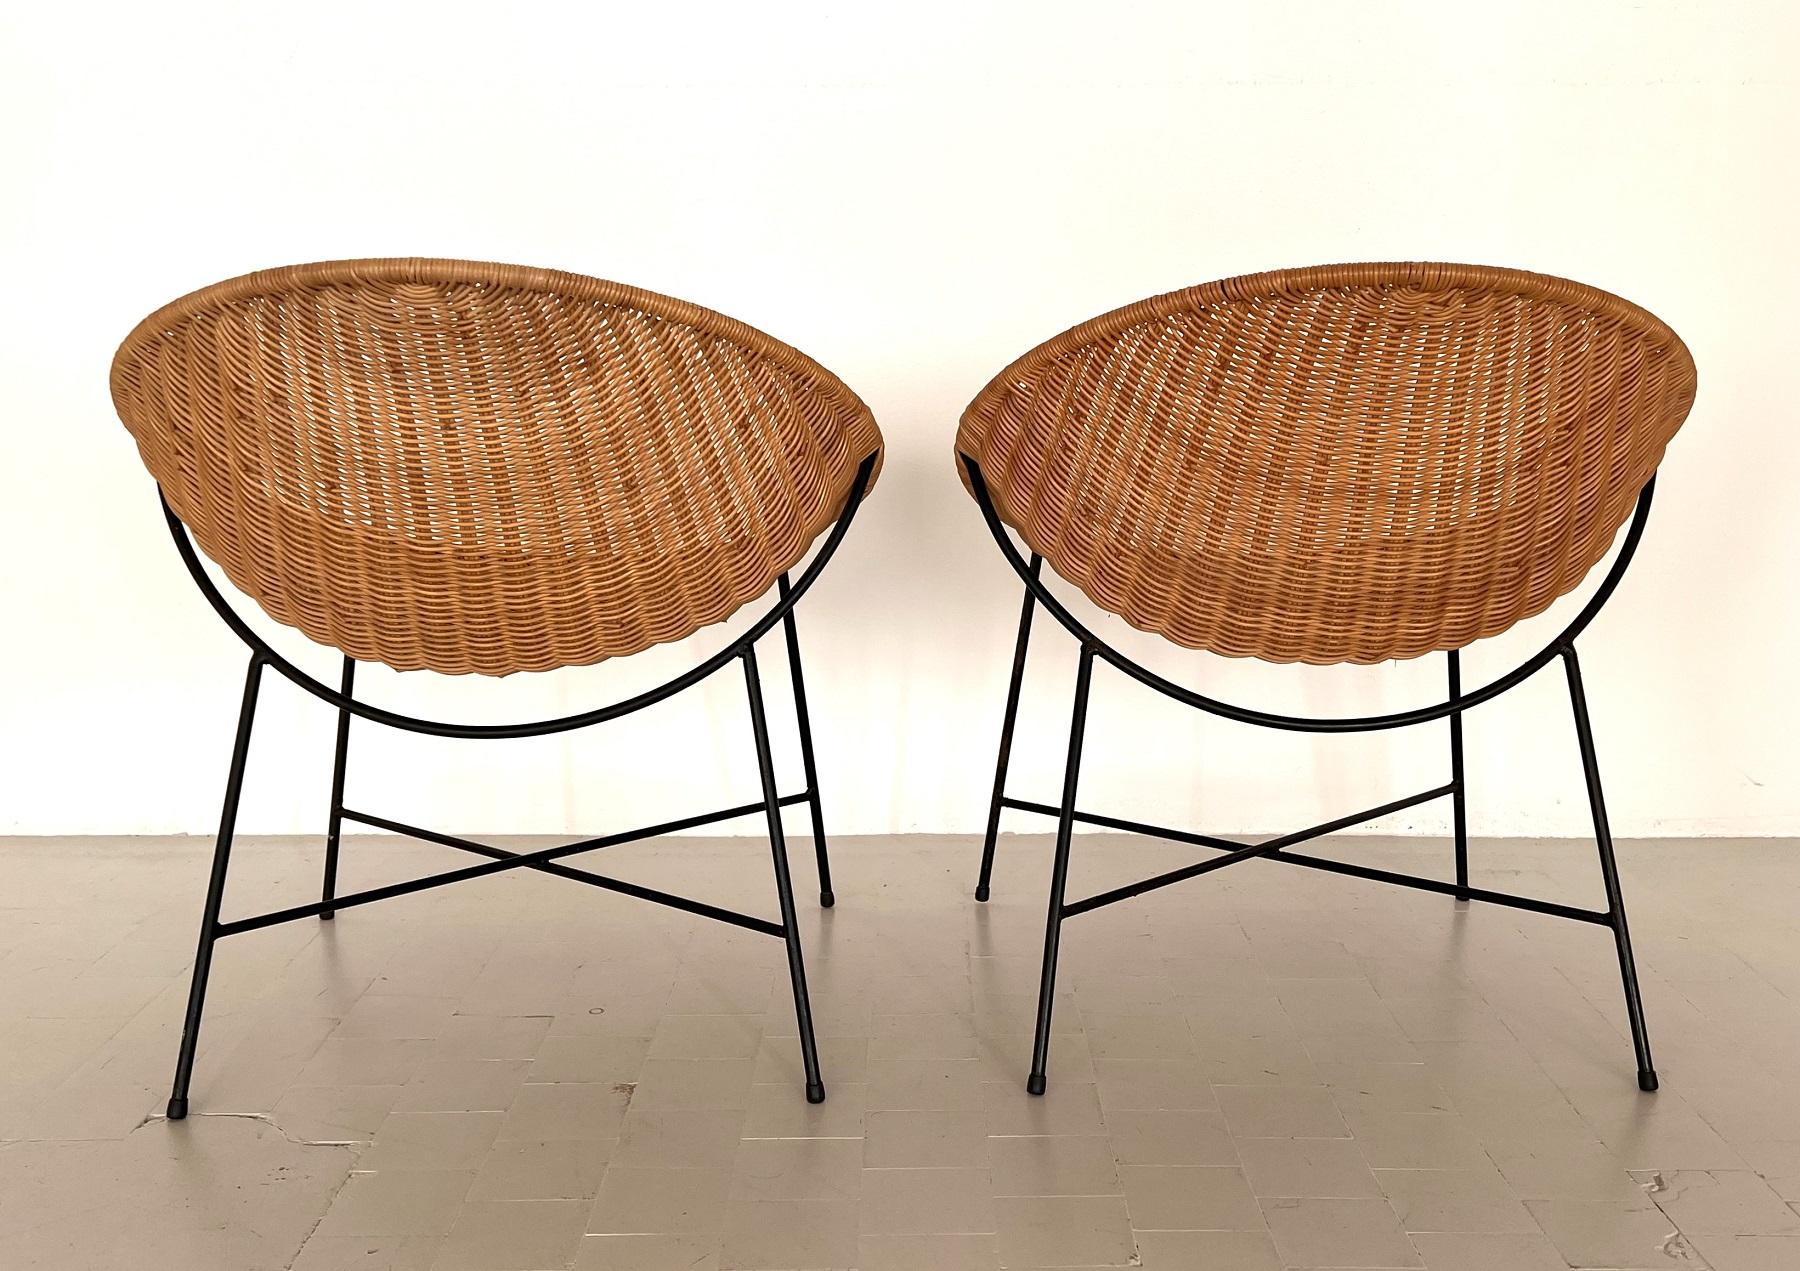 Pair of Mid-Century Rattan Lounge Chairs, 1970s For Sale 4